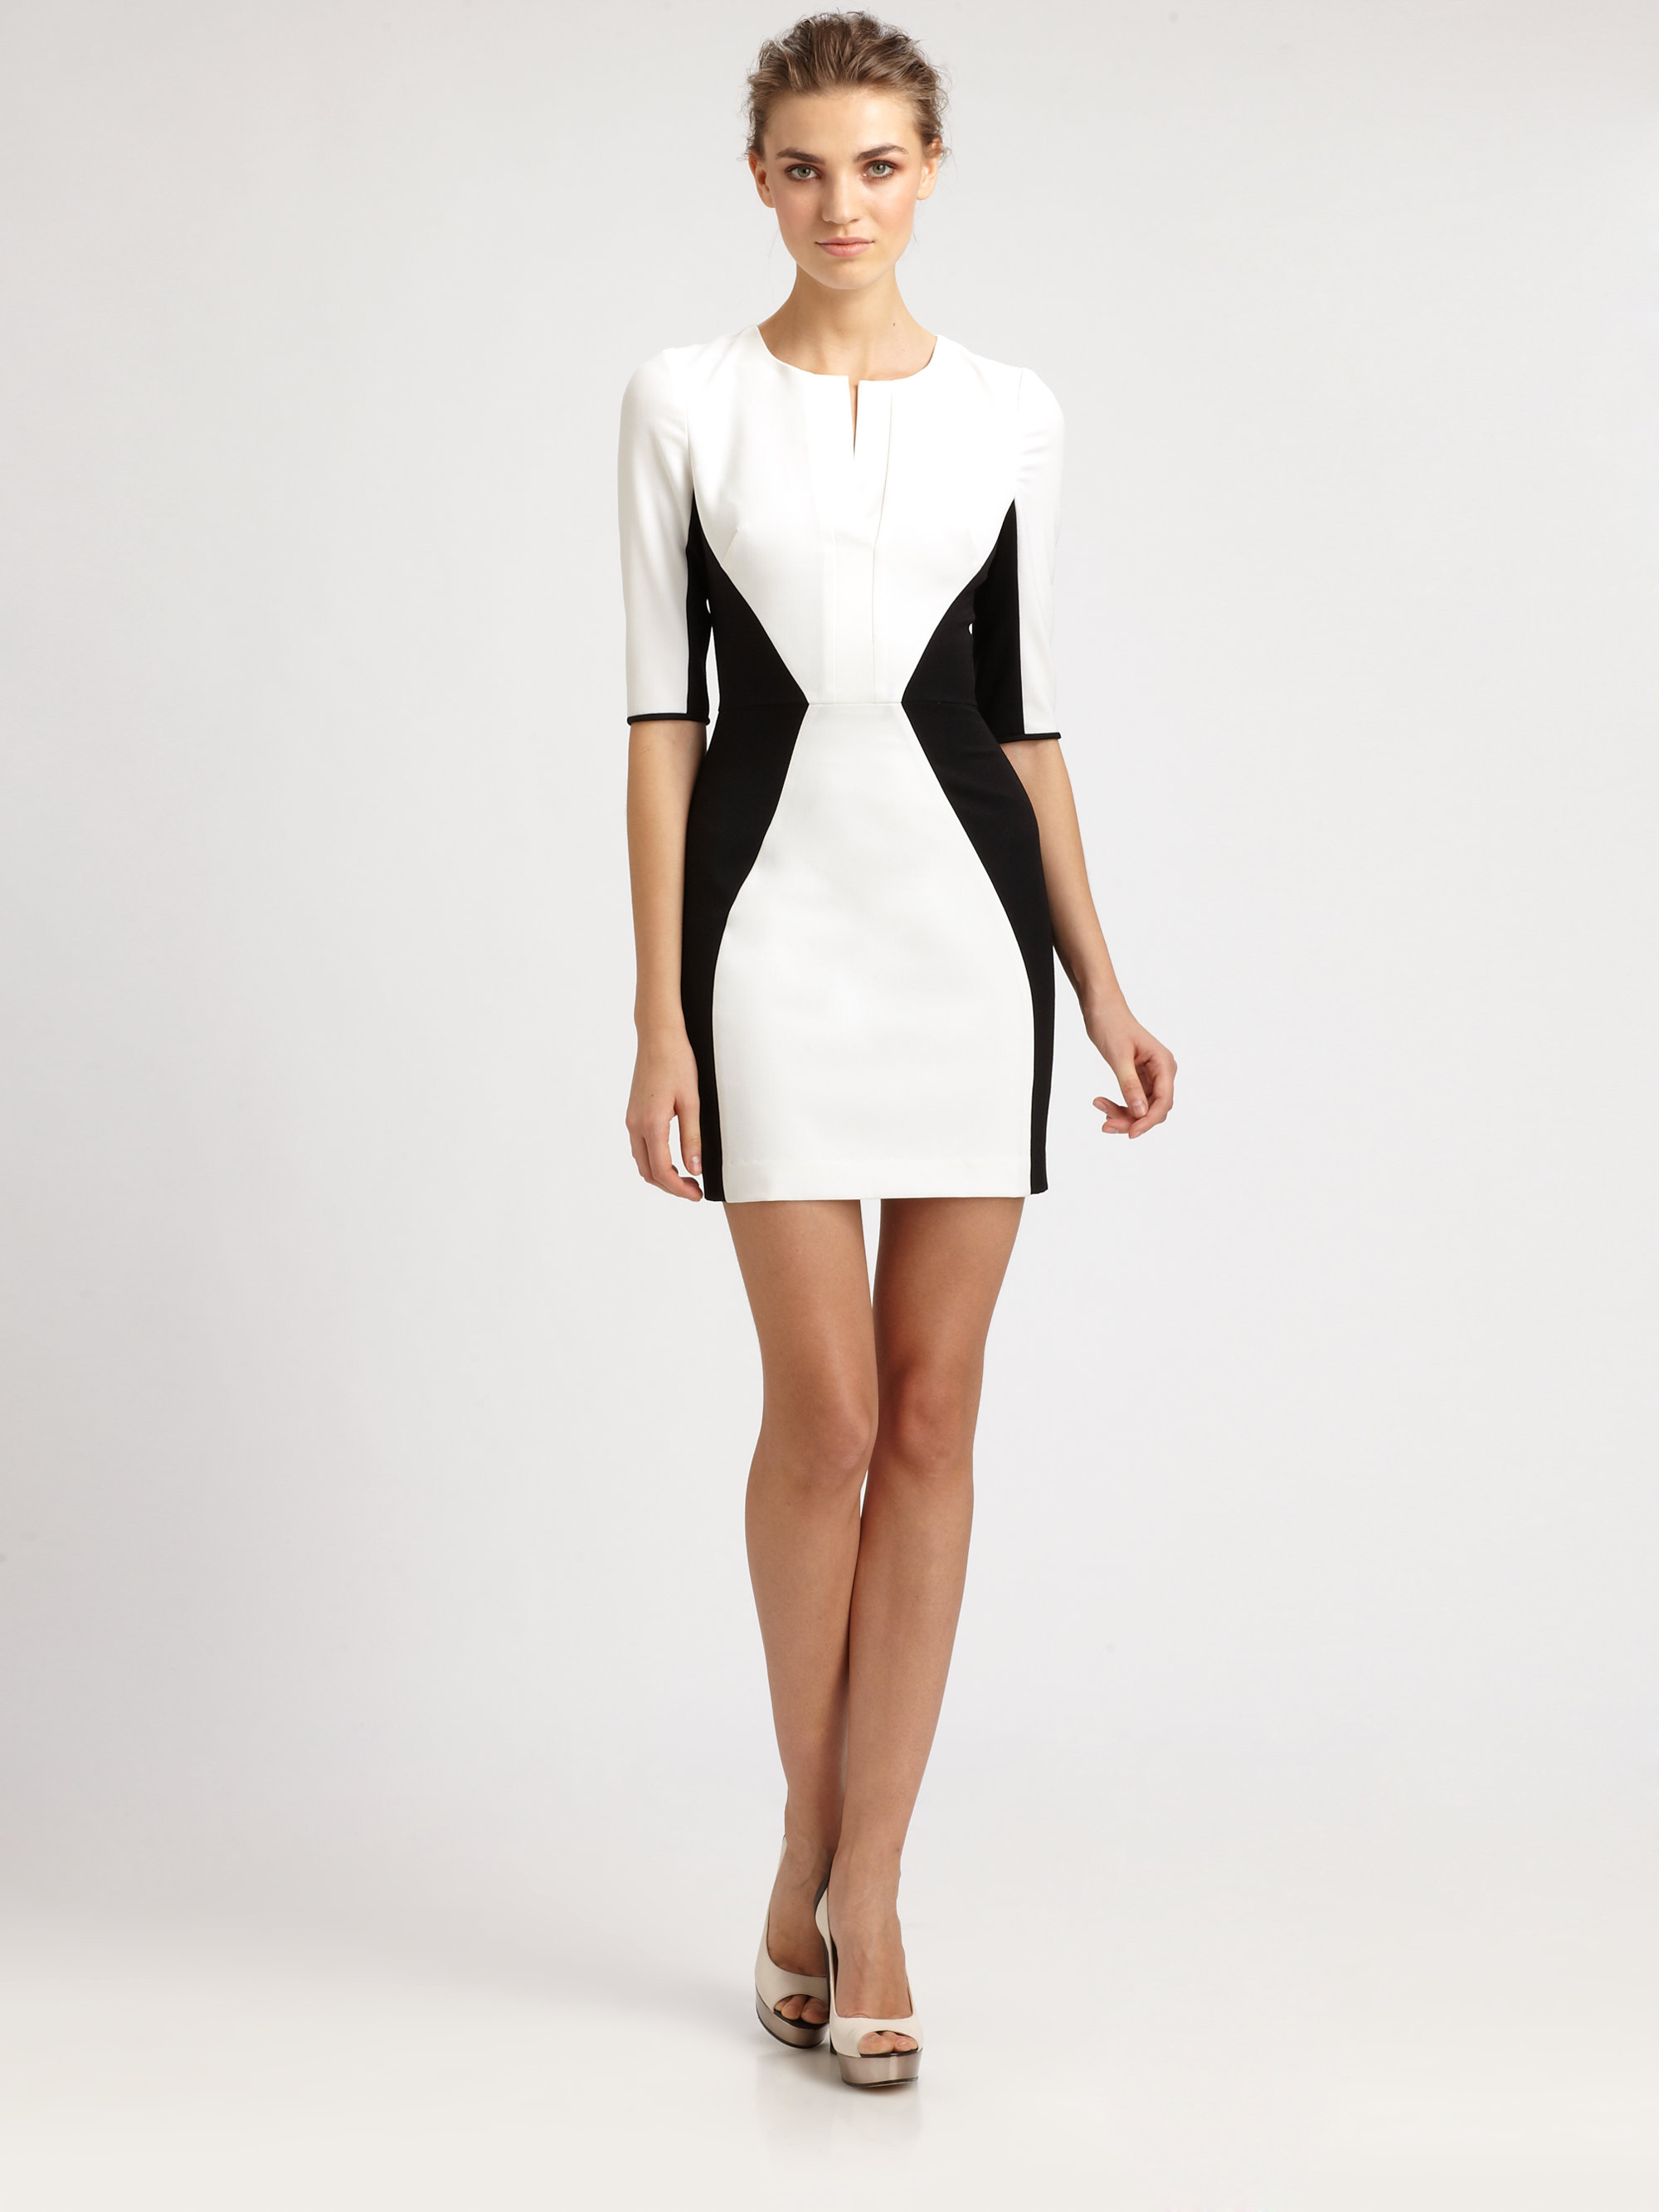 white and black color block dress